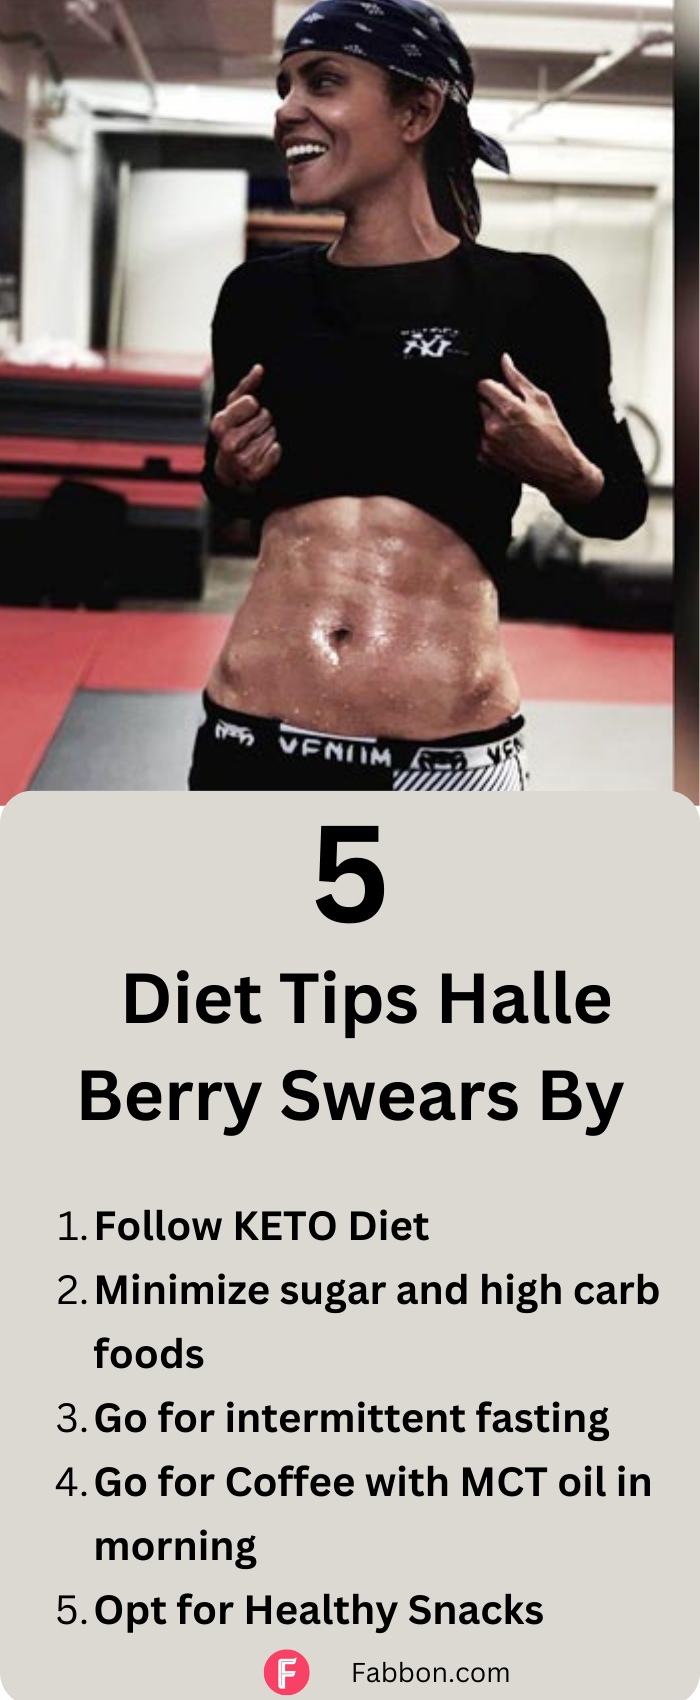 5 Diet Tips Halle Berry Swears By (1)